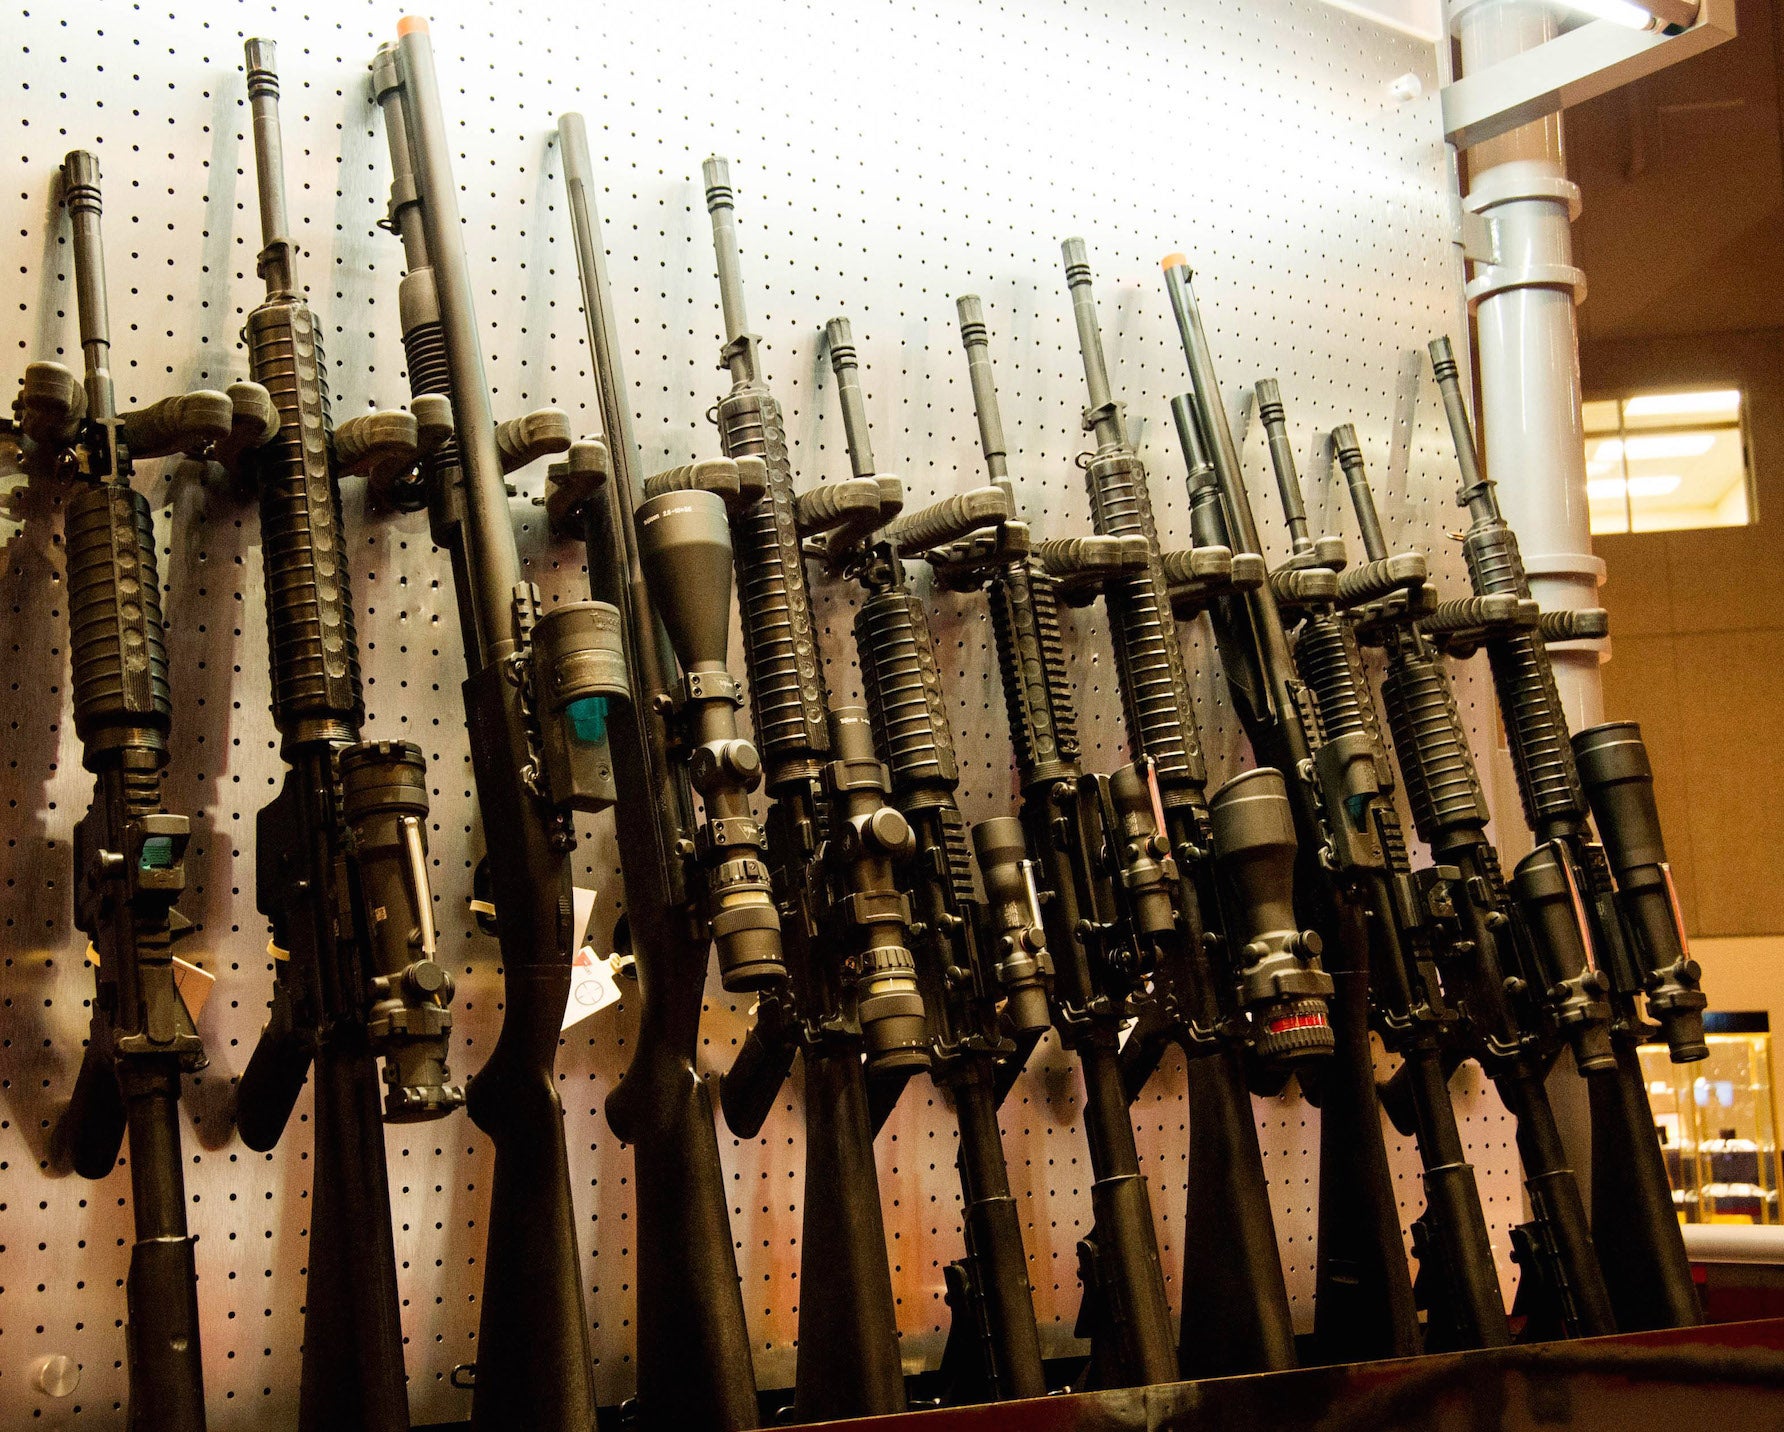 A wall of semi-automatic rifles at the National Rifle Association Annual Meetings and Exhibits in St. Louis, Missouri.